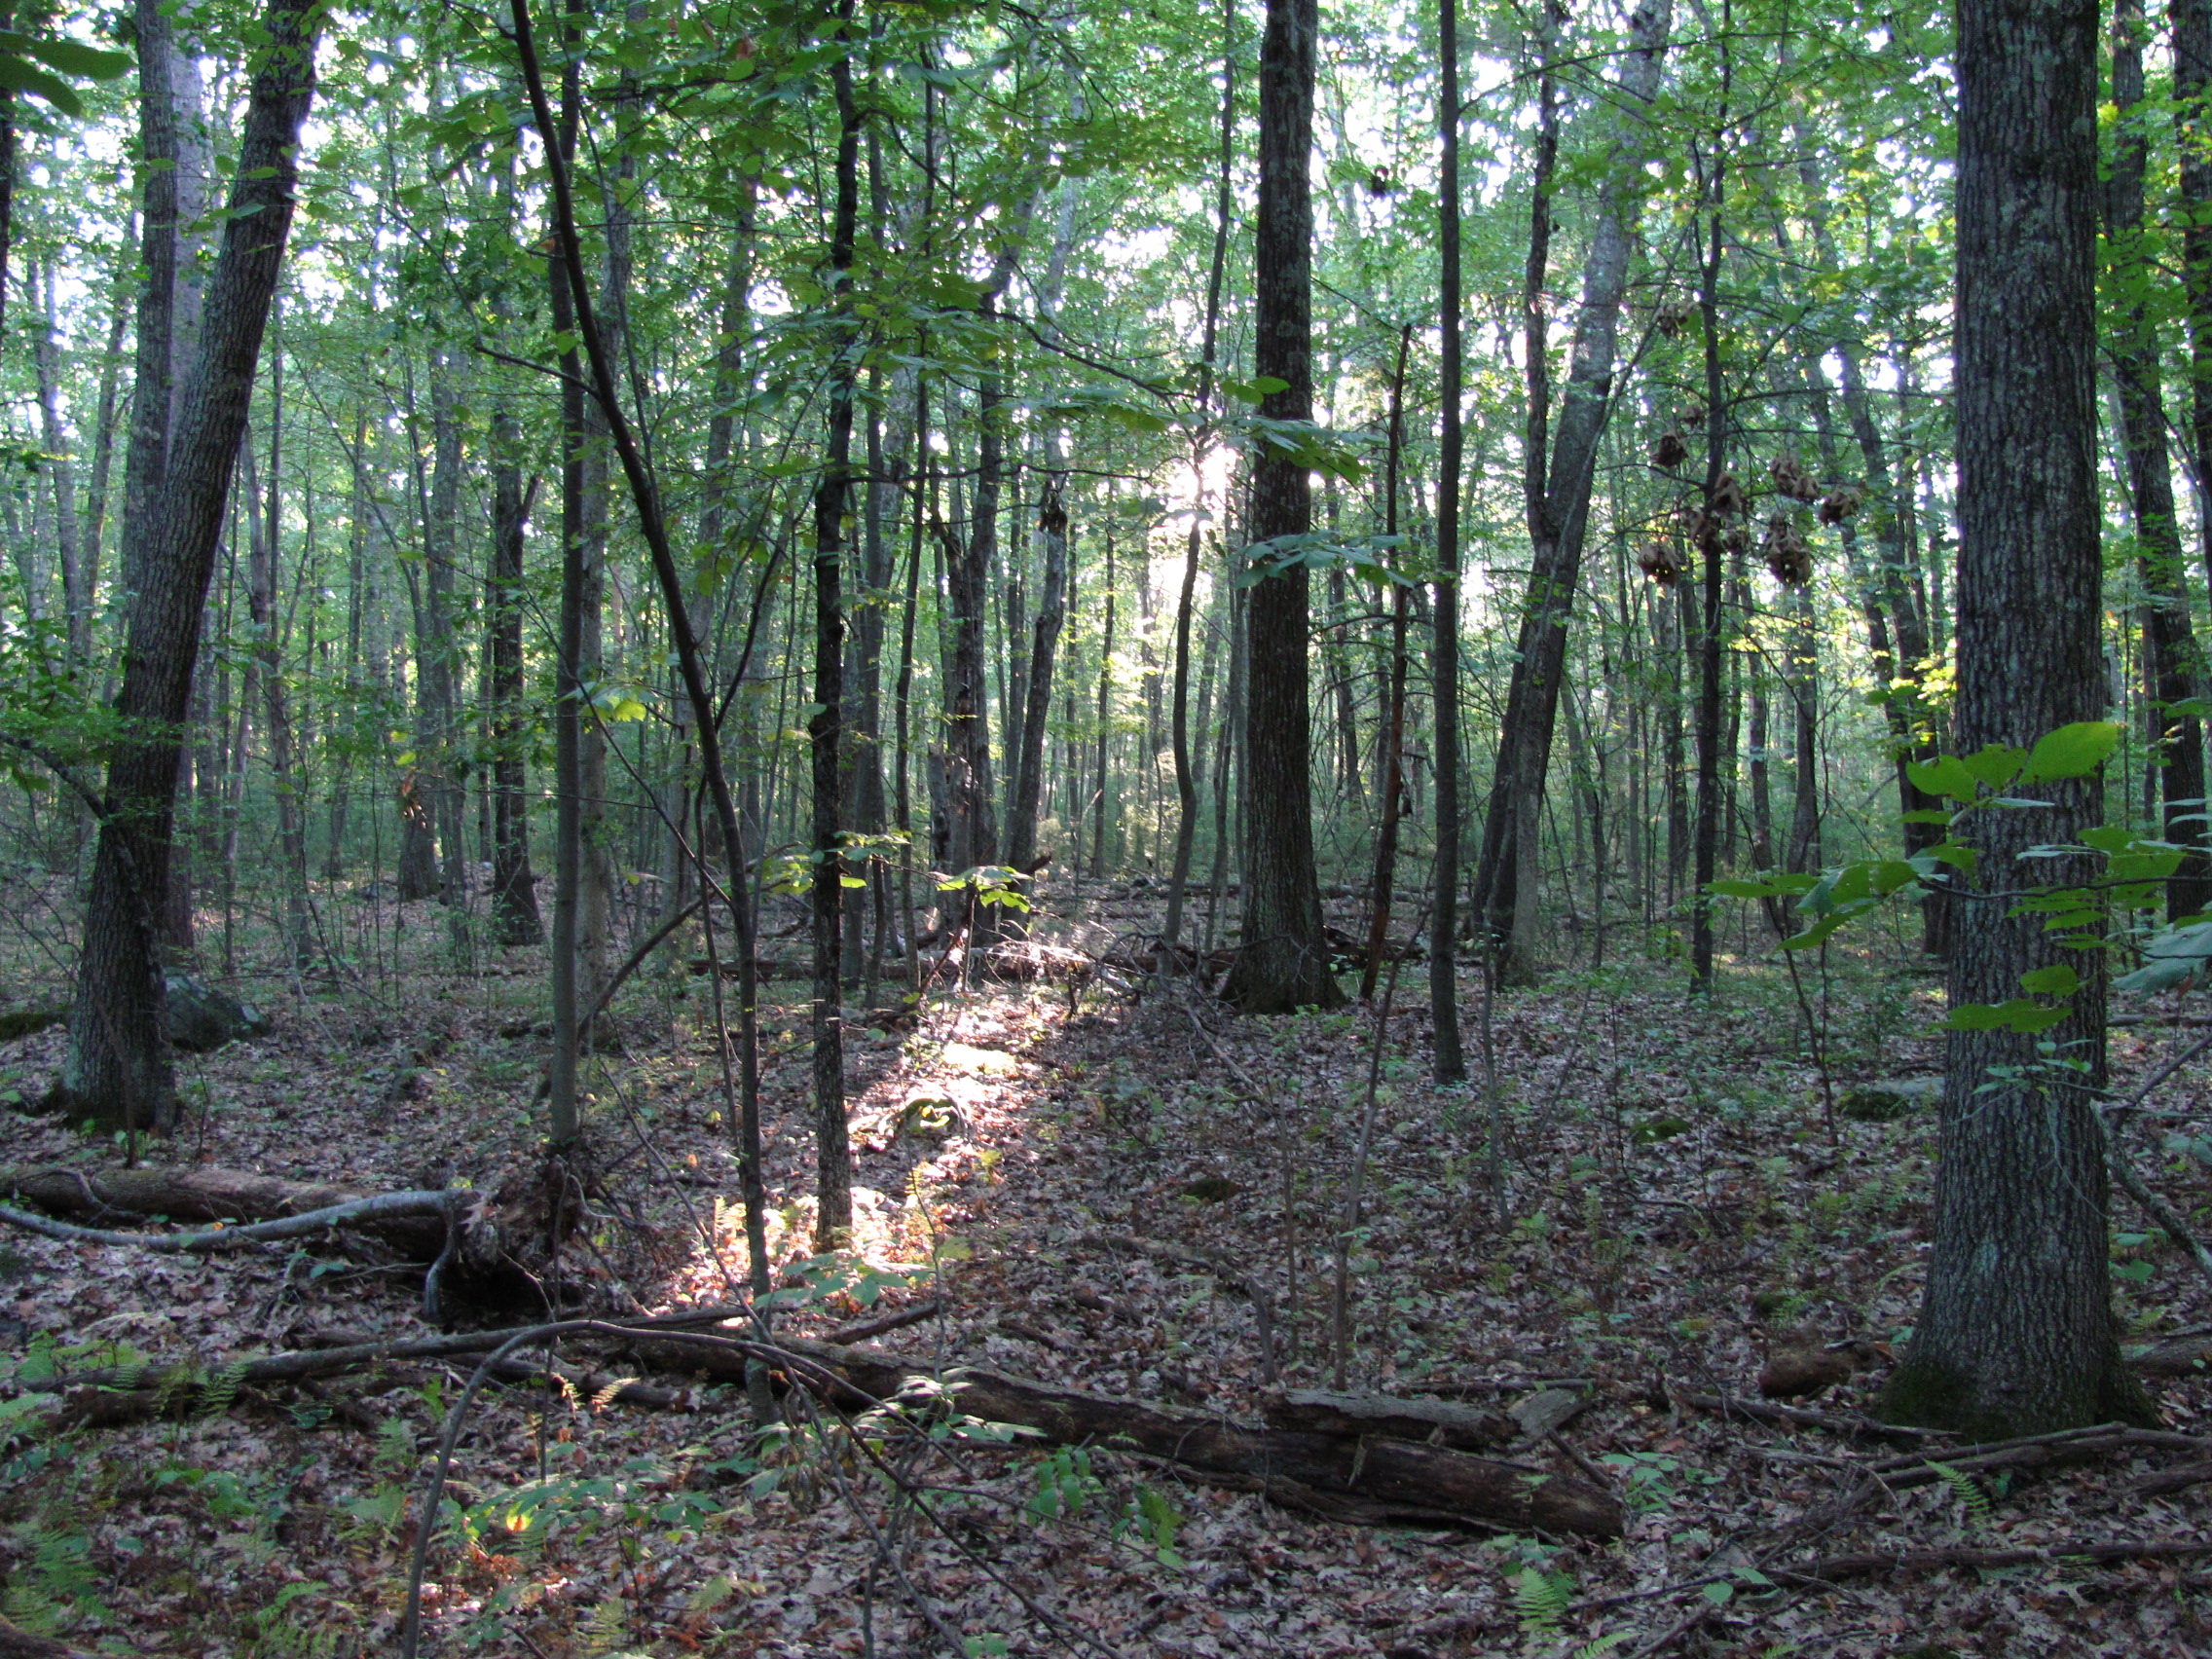 File:Estabrook Woods, Concord MA.jpg - Wikimedia Commons